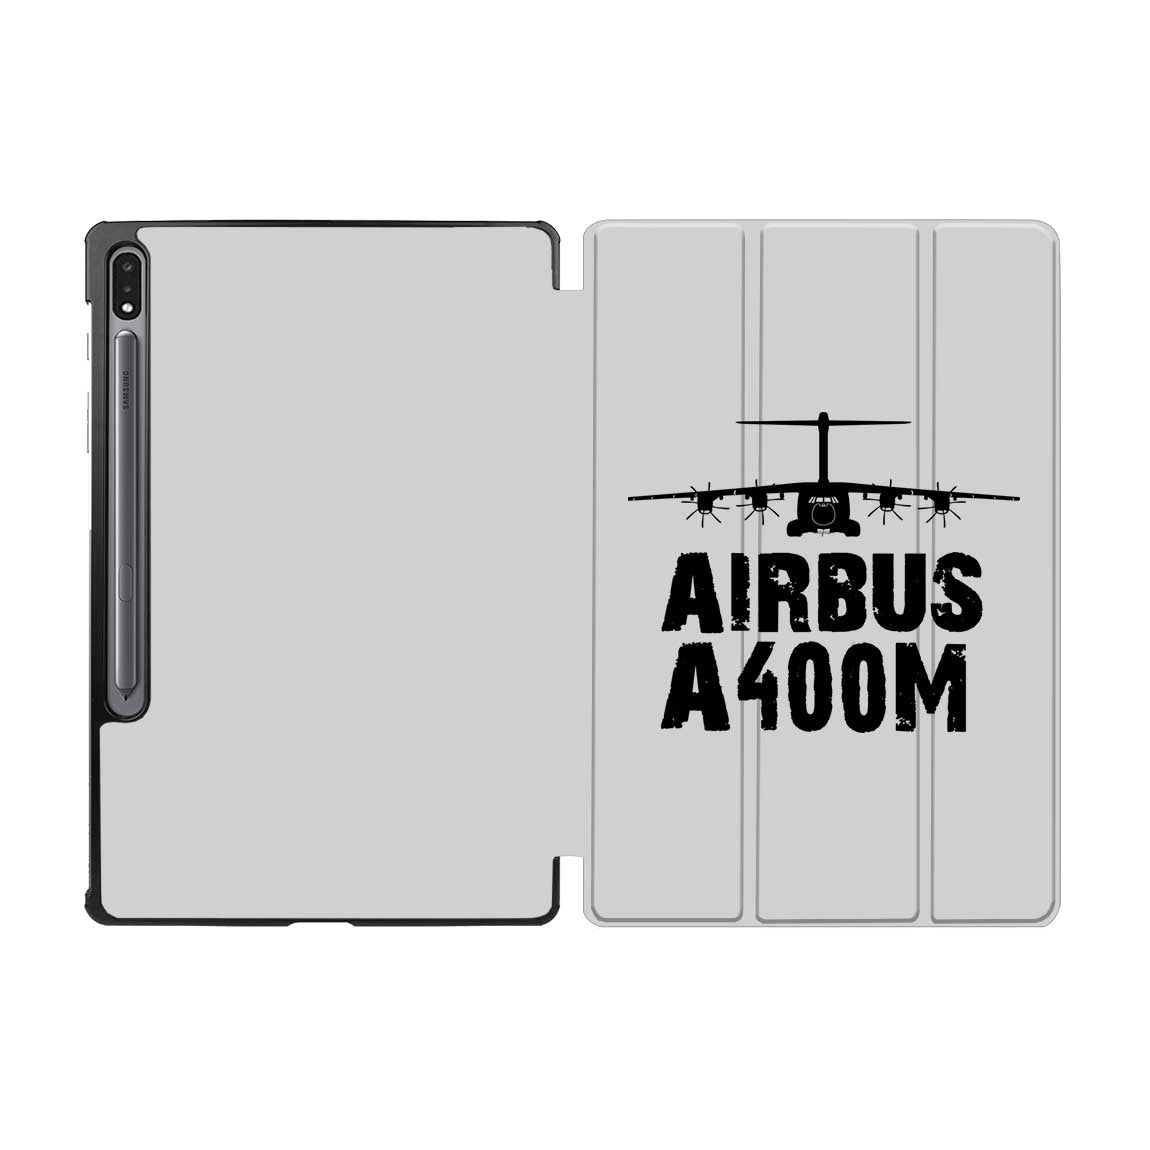 Airbus A400M & Plane Designed Samsung Tablet Cases